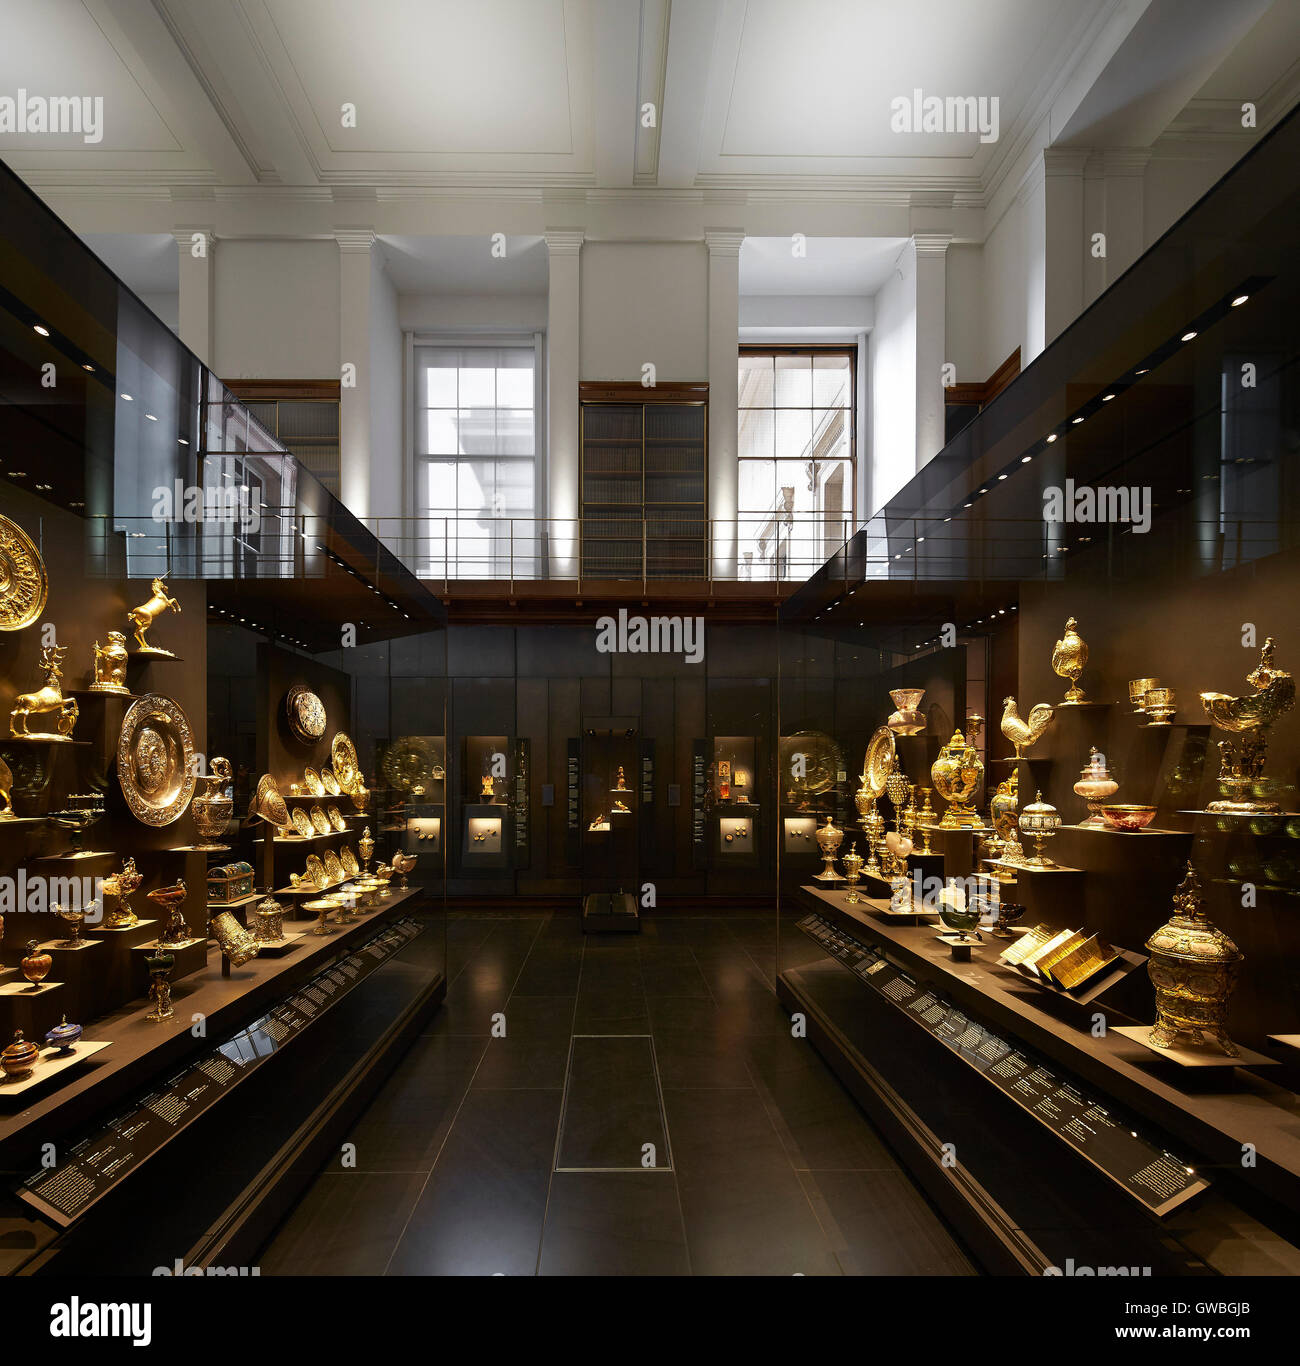 Showcase with artefact collection. Waddesdon Bequest Gallery at the British Museum, London, United Kingdom. Architect: Stanton Williams, 2015. Stock Photo